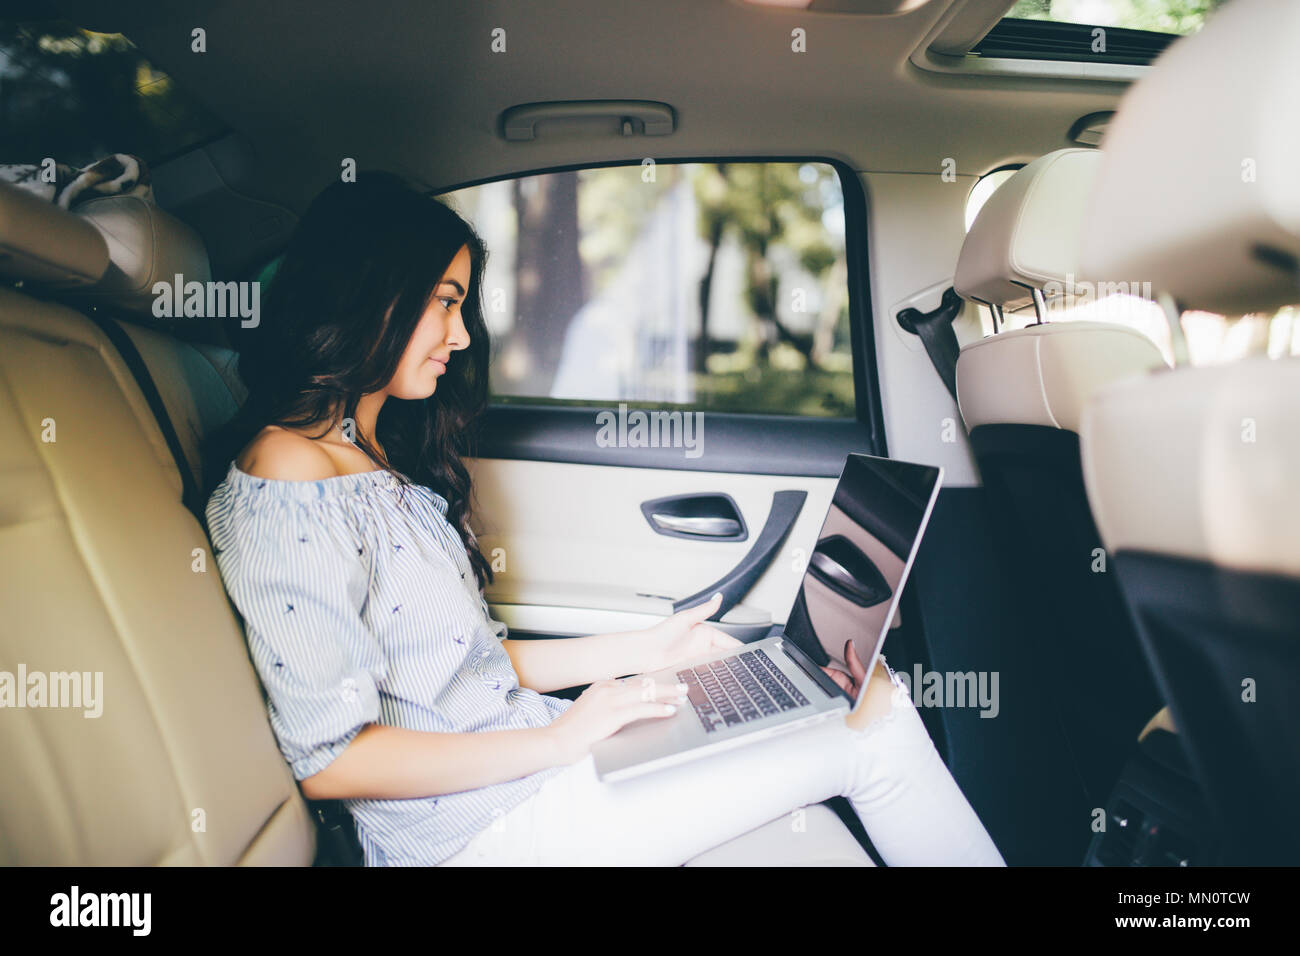 Business woman sitting with laptop and working on backseat of car Stock Photo